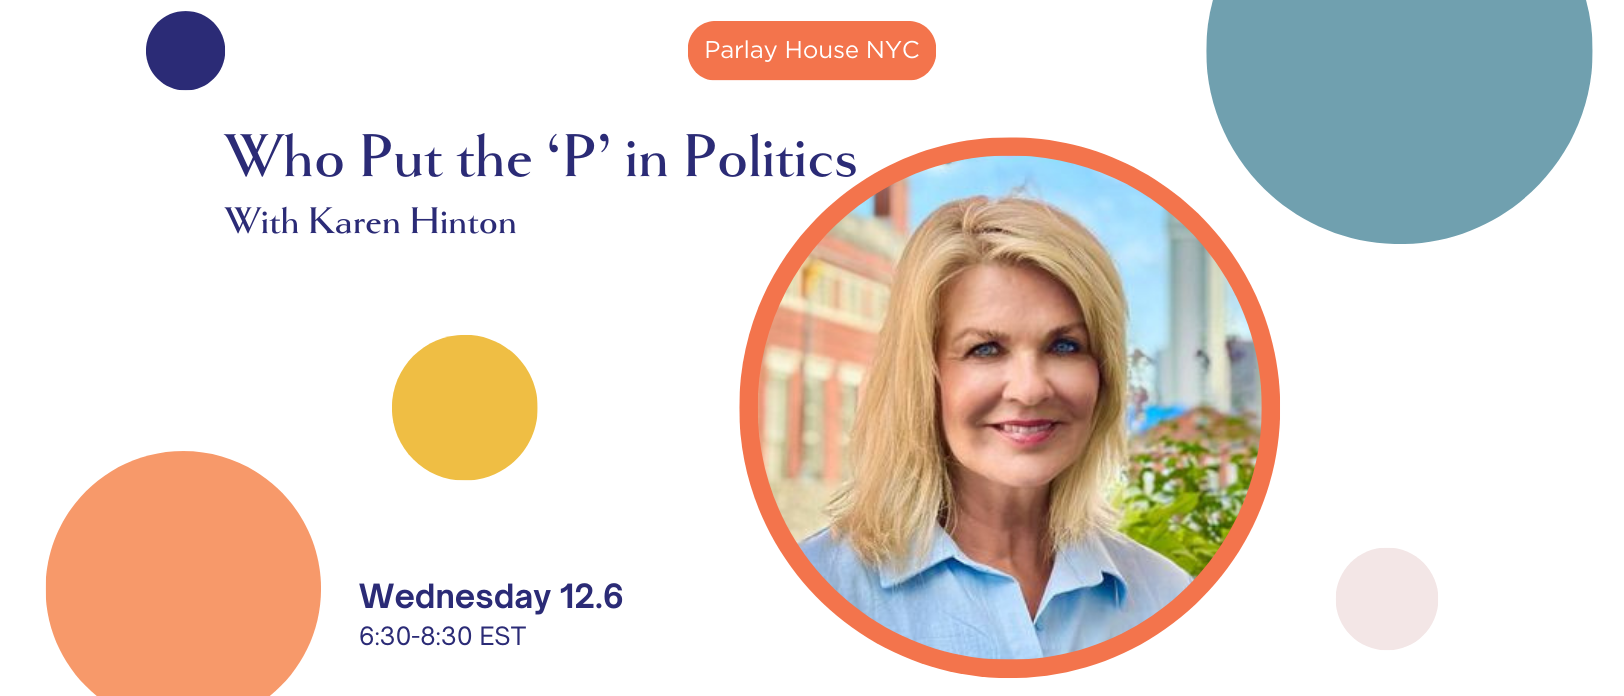 NYC: Who Put the ‘P’ in Politics?